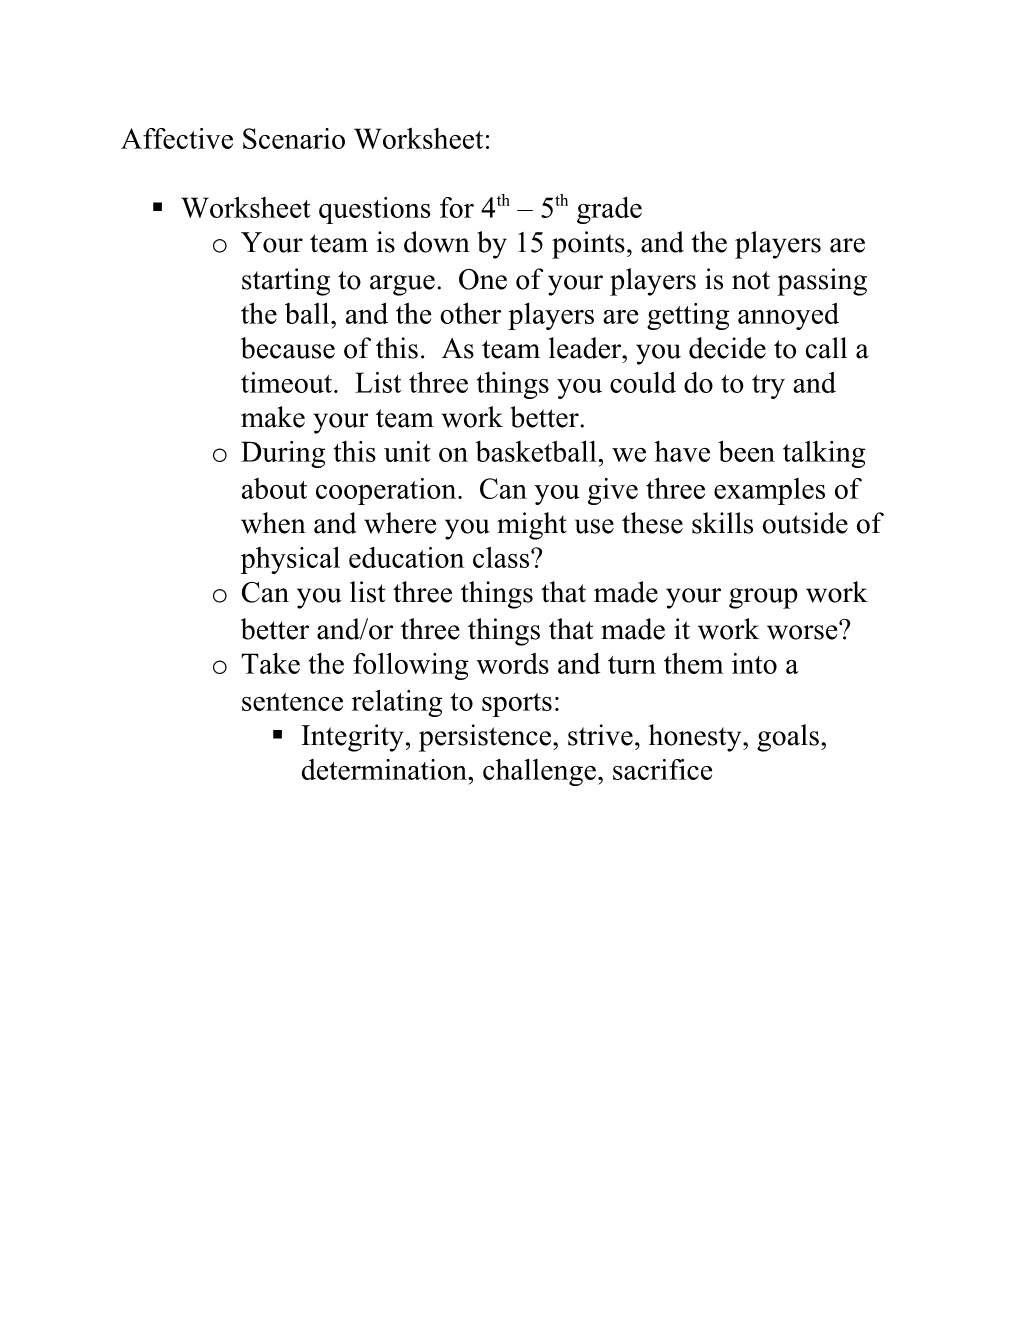 Worksheet Questions for 4Th 5Th Grade